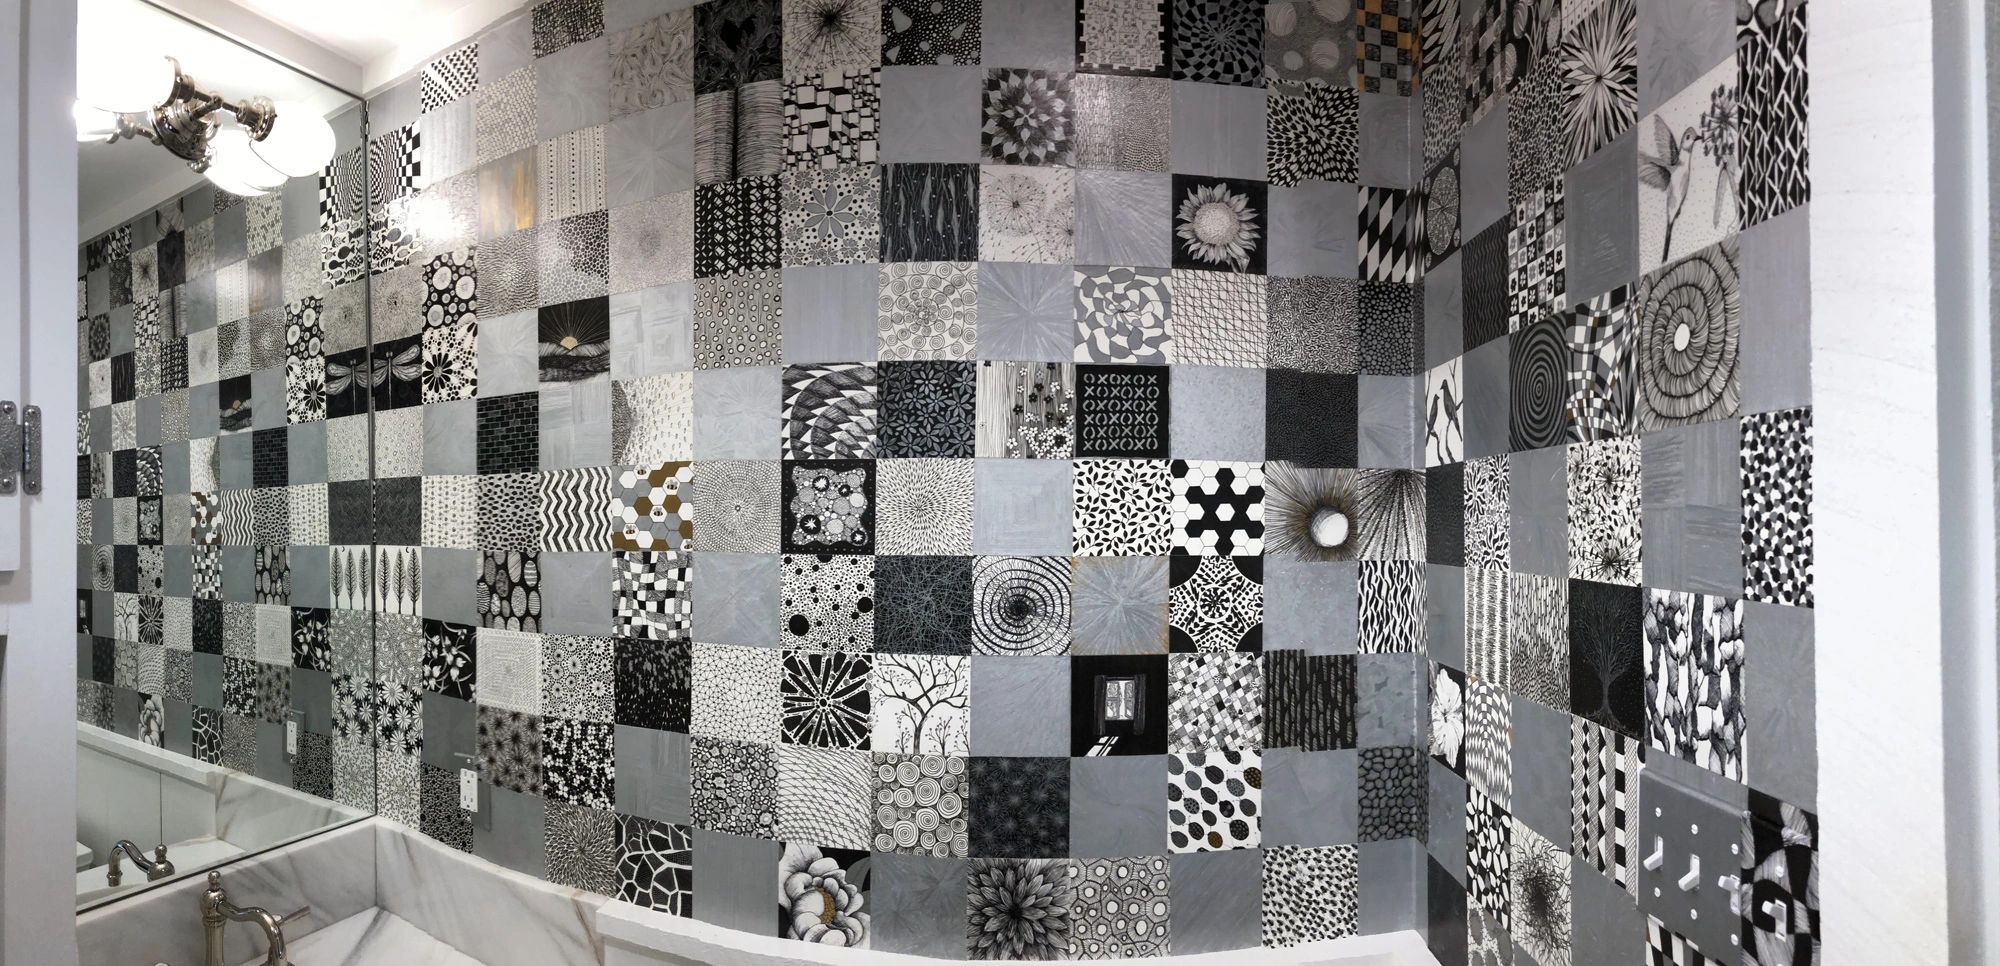 This bathroom was remodeled with 278 individual 5"x 5" pen and ink drawings by Tamara Robertson.